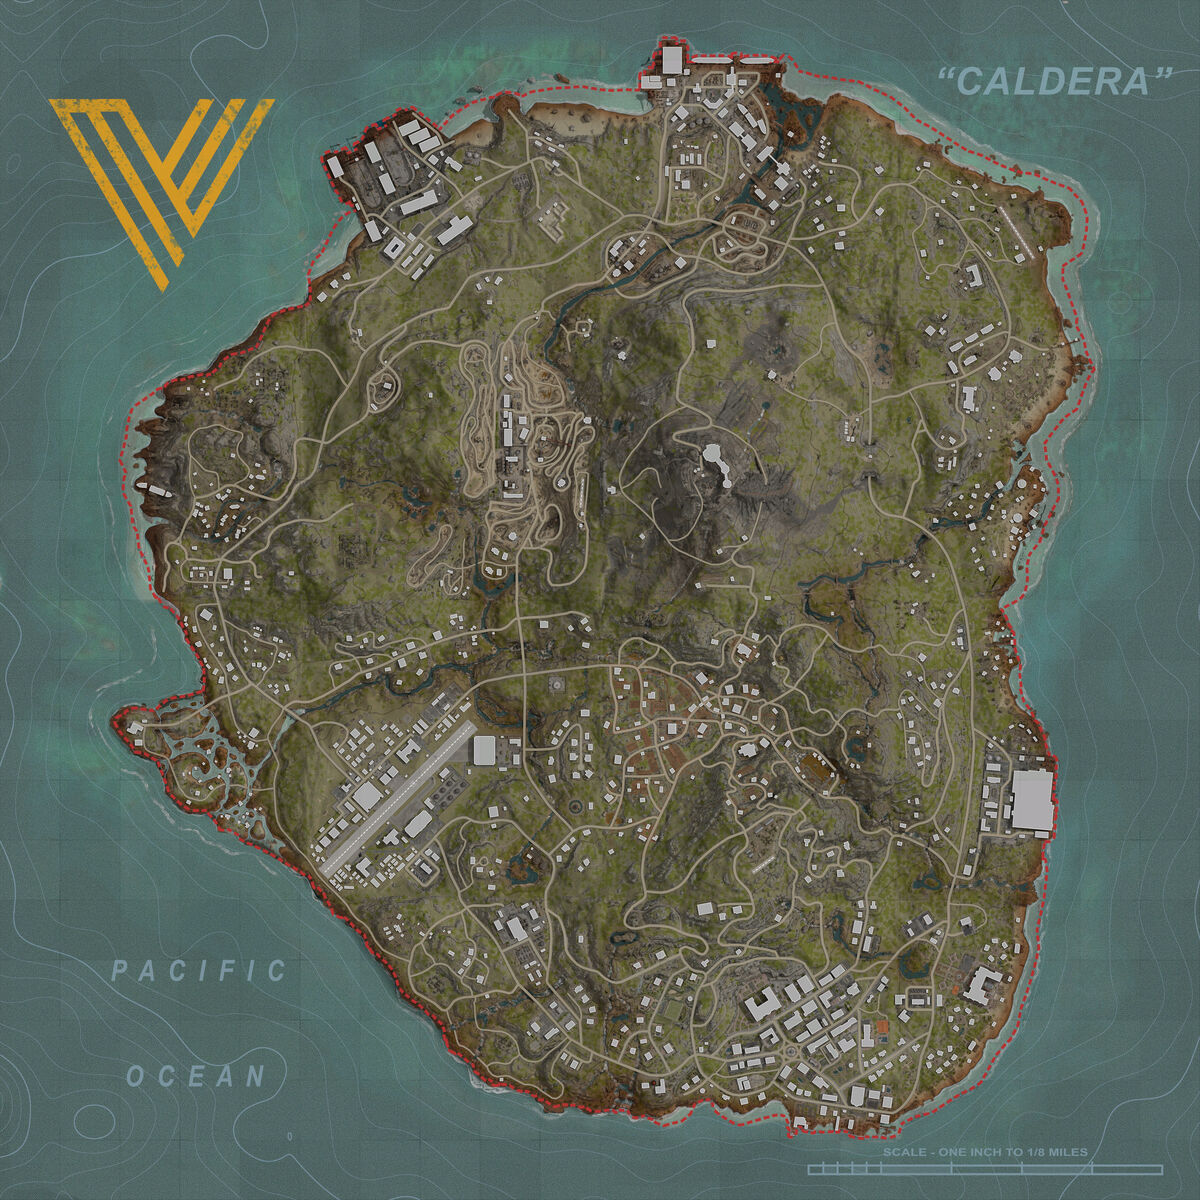 An Update on Call of Duty: Warzone Caldera